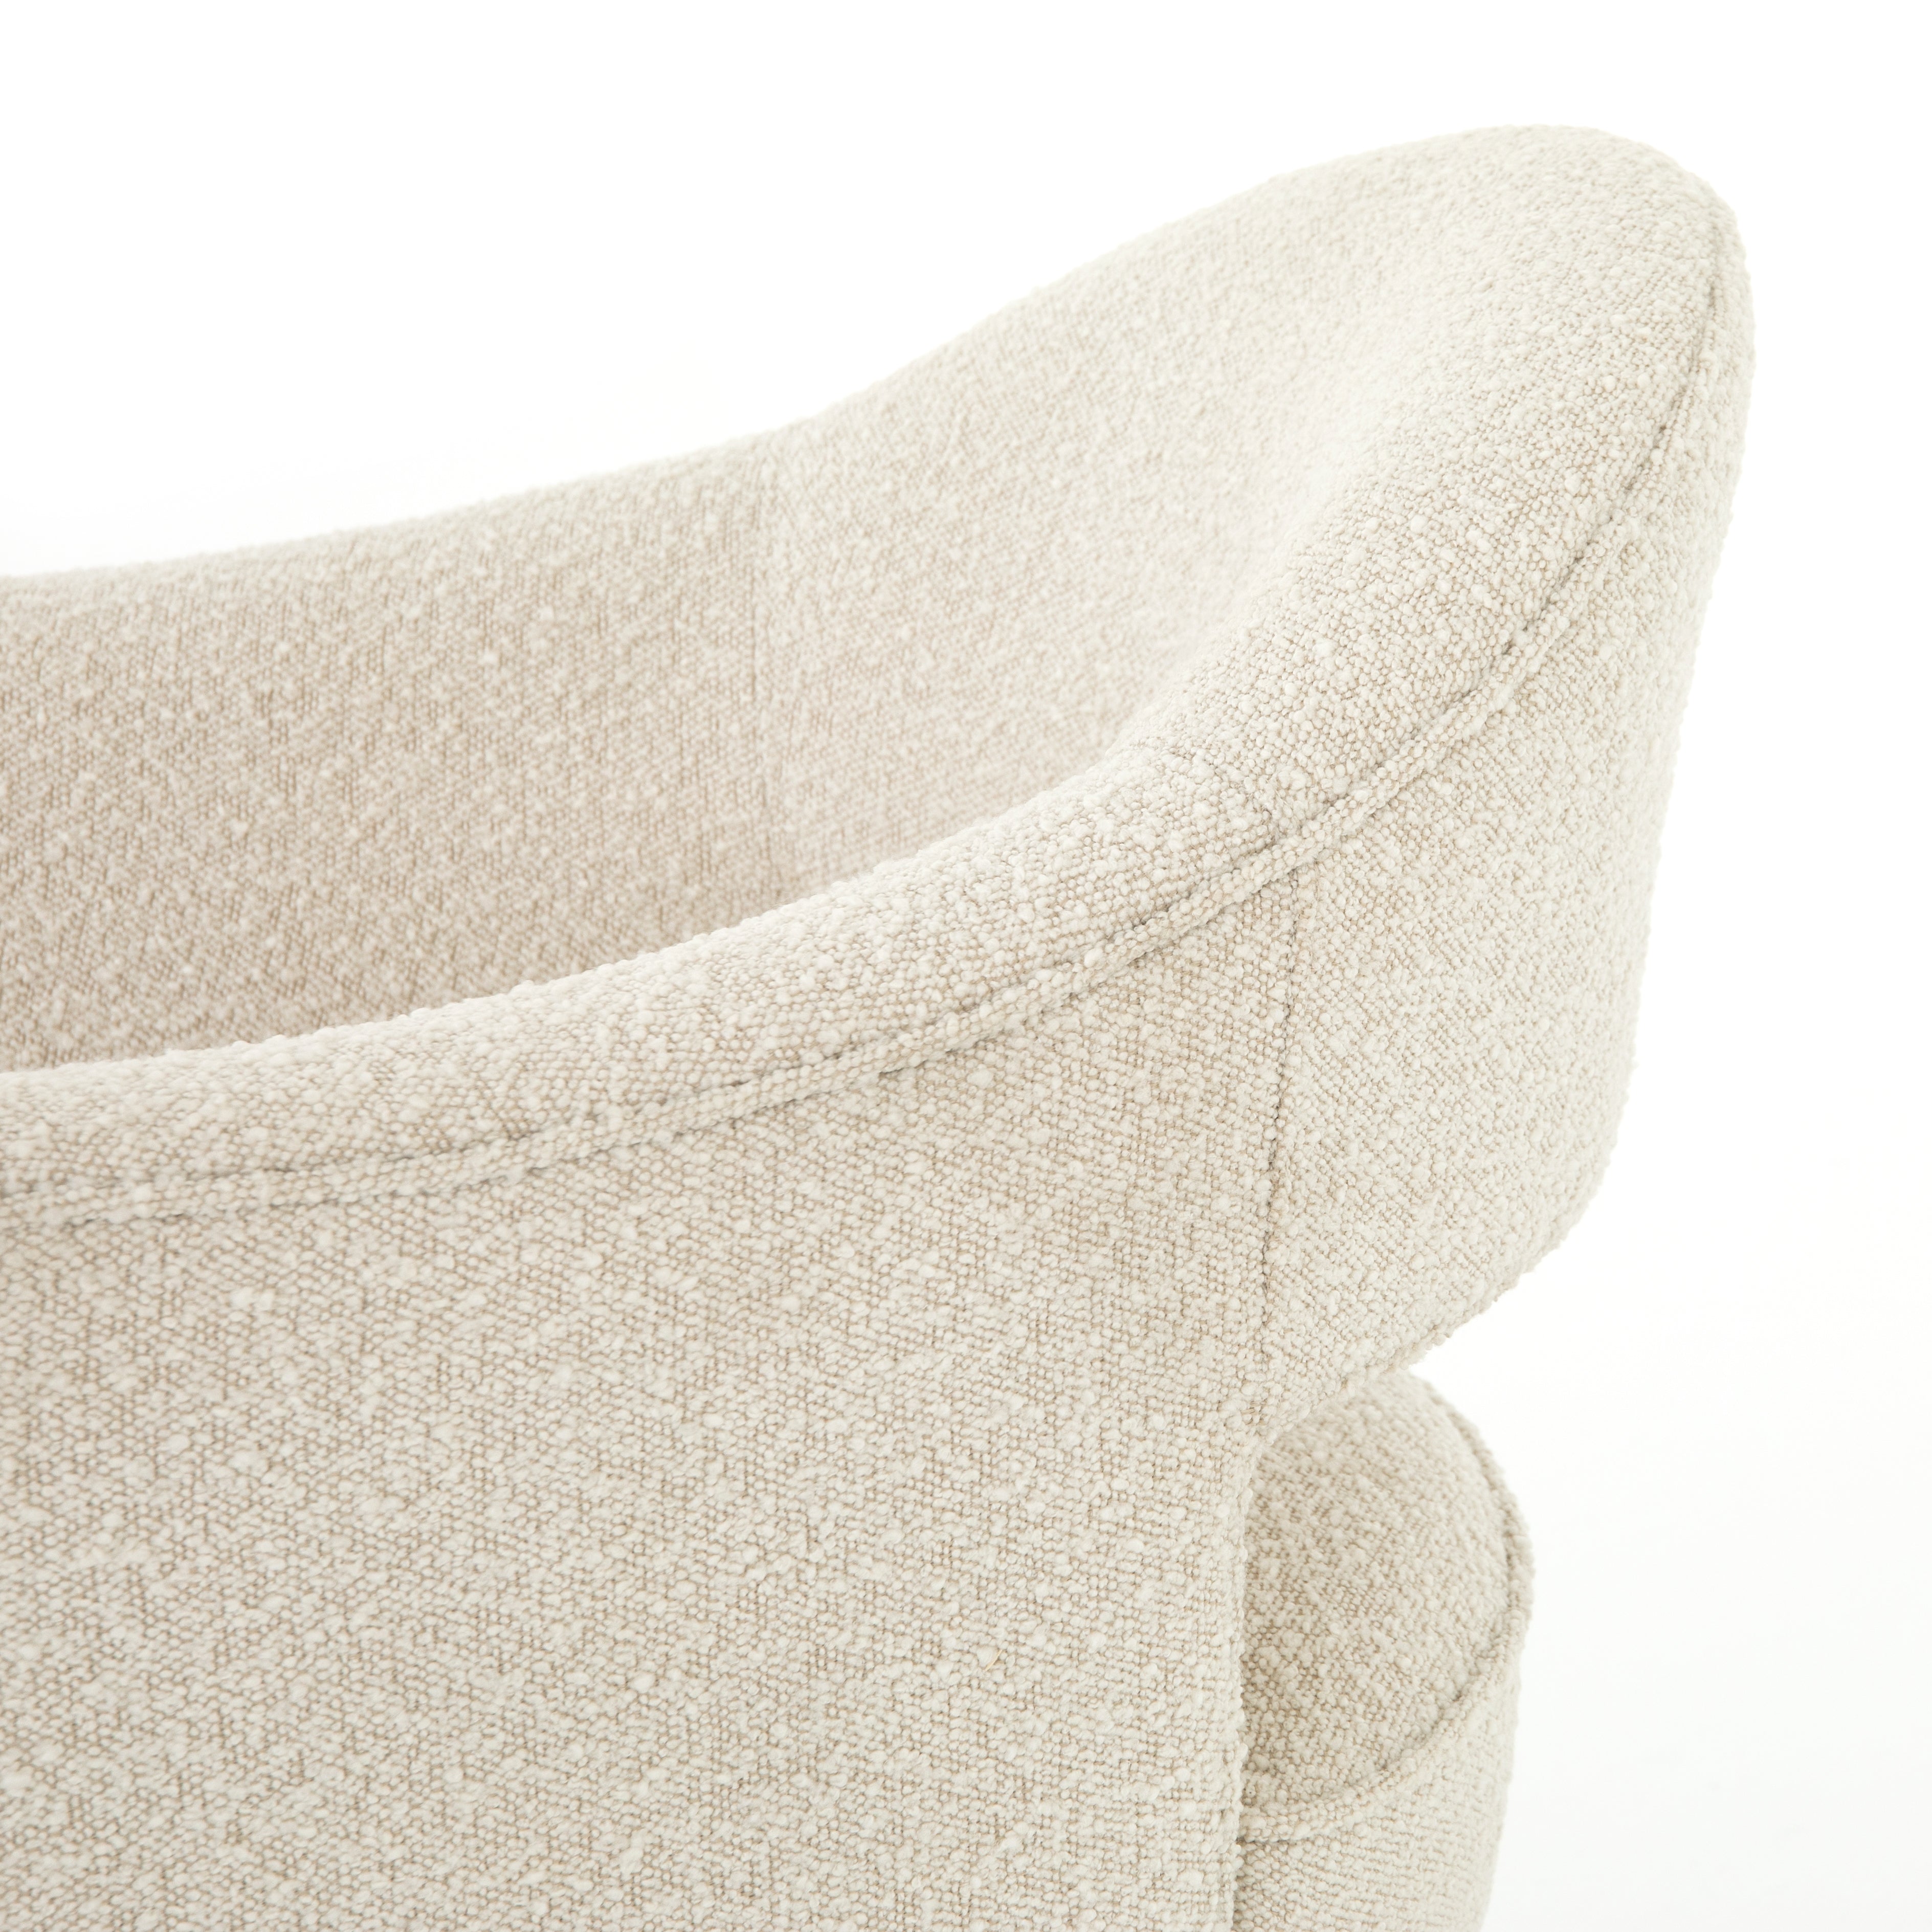 We love the textured look of this Adara Knoll Natural Desk Chair. The high back make this both a comfortable and supportive chair for your office or other area.   Overall Dimensions: 27.50"w x 28.00"d x 34.00"h Seat Depth: 21" Seat Height: 20" Arm Height from Floor: 28" Arm Height from Seat: 8"